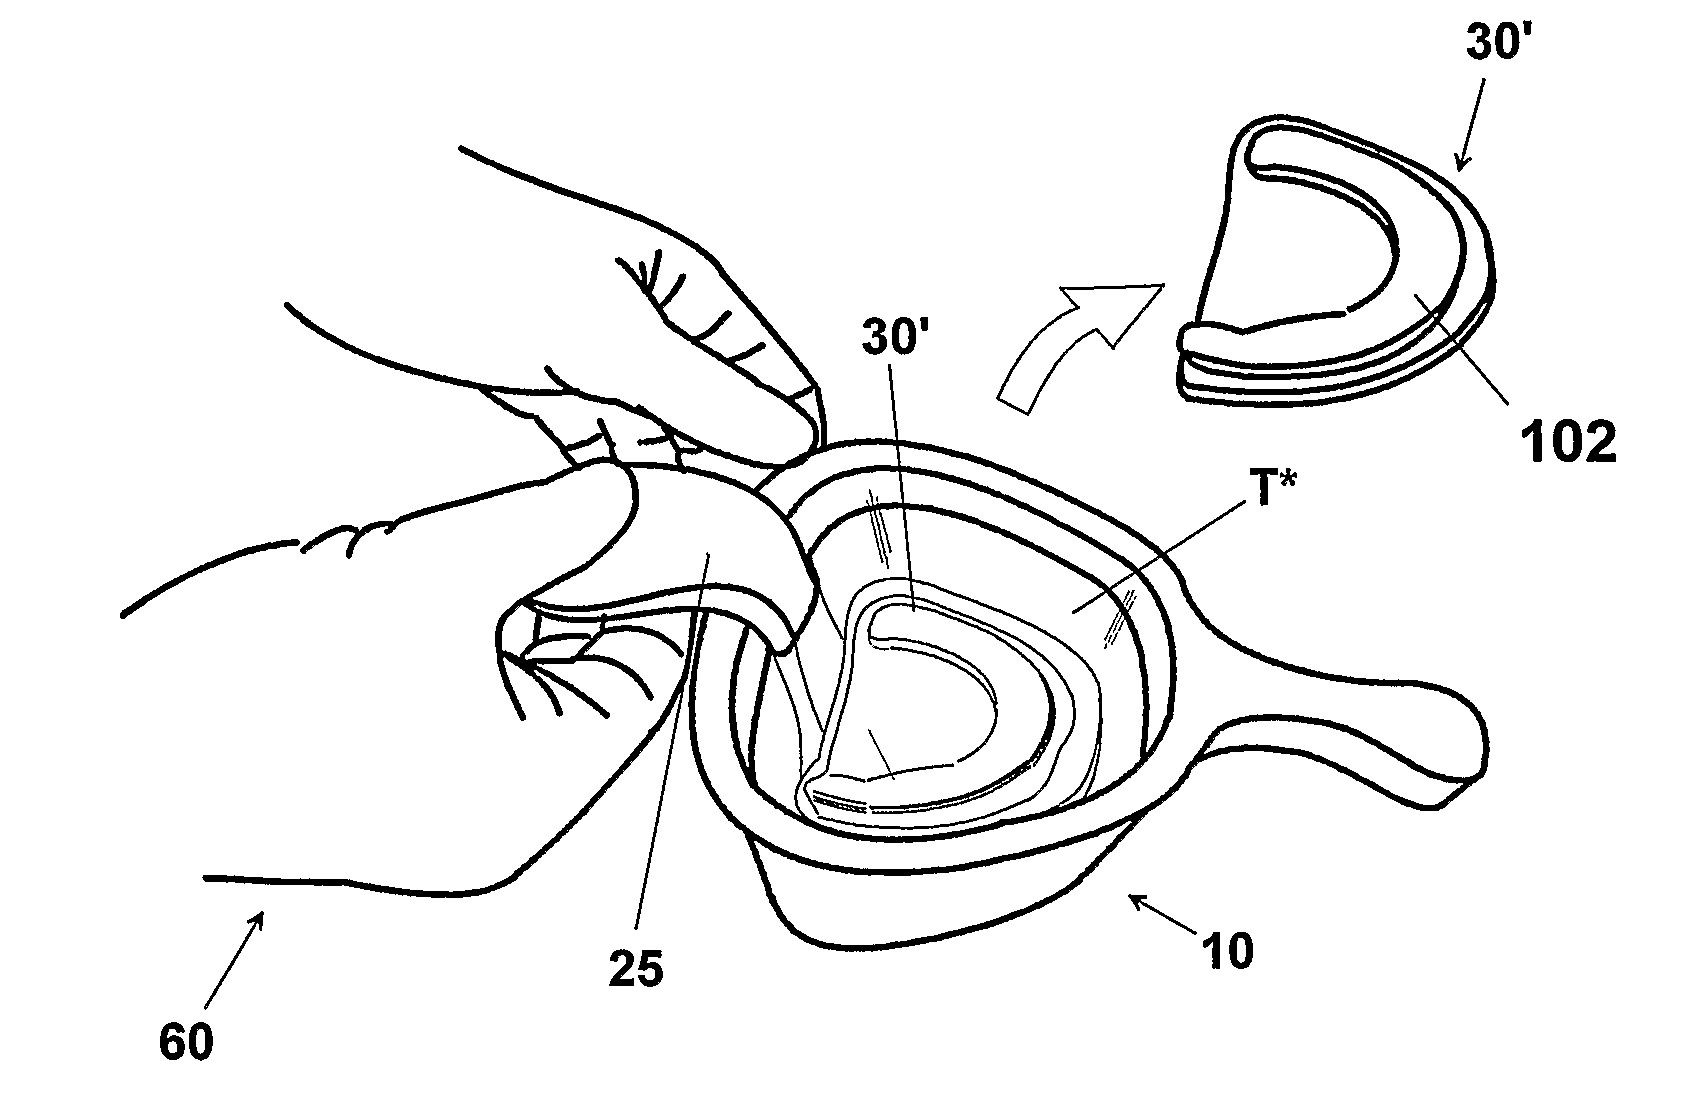 Method for producing a dental impression tray